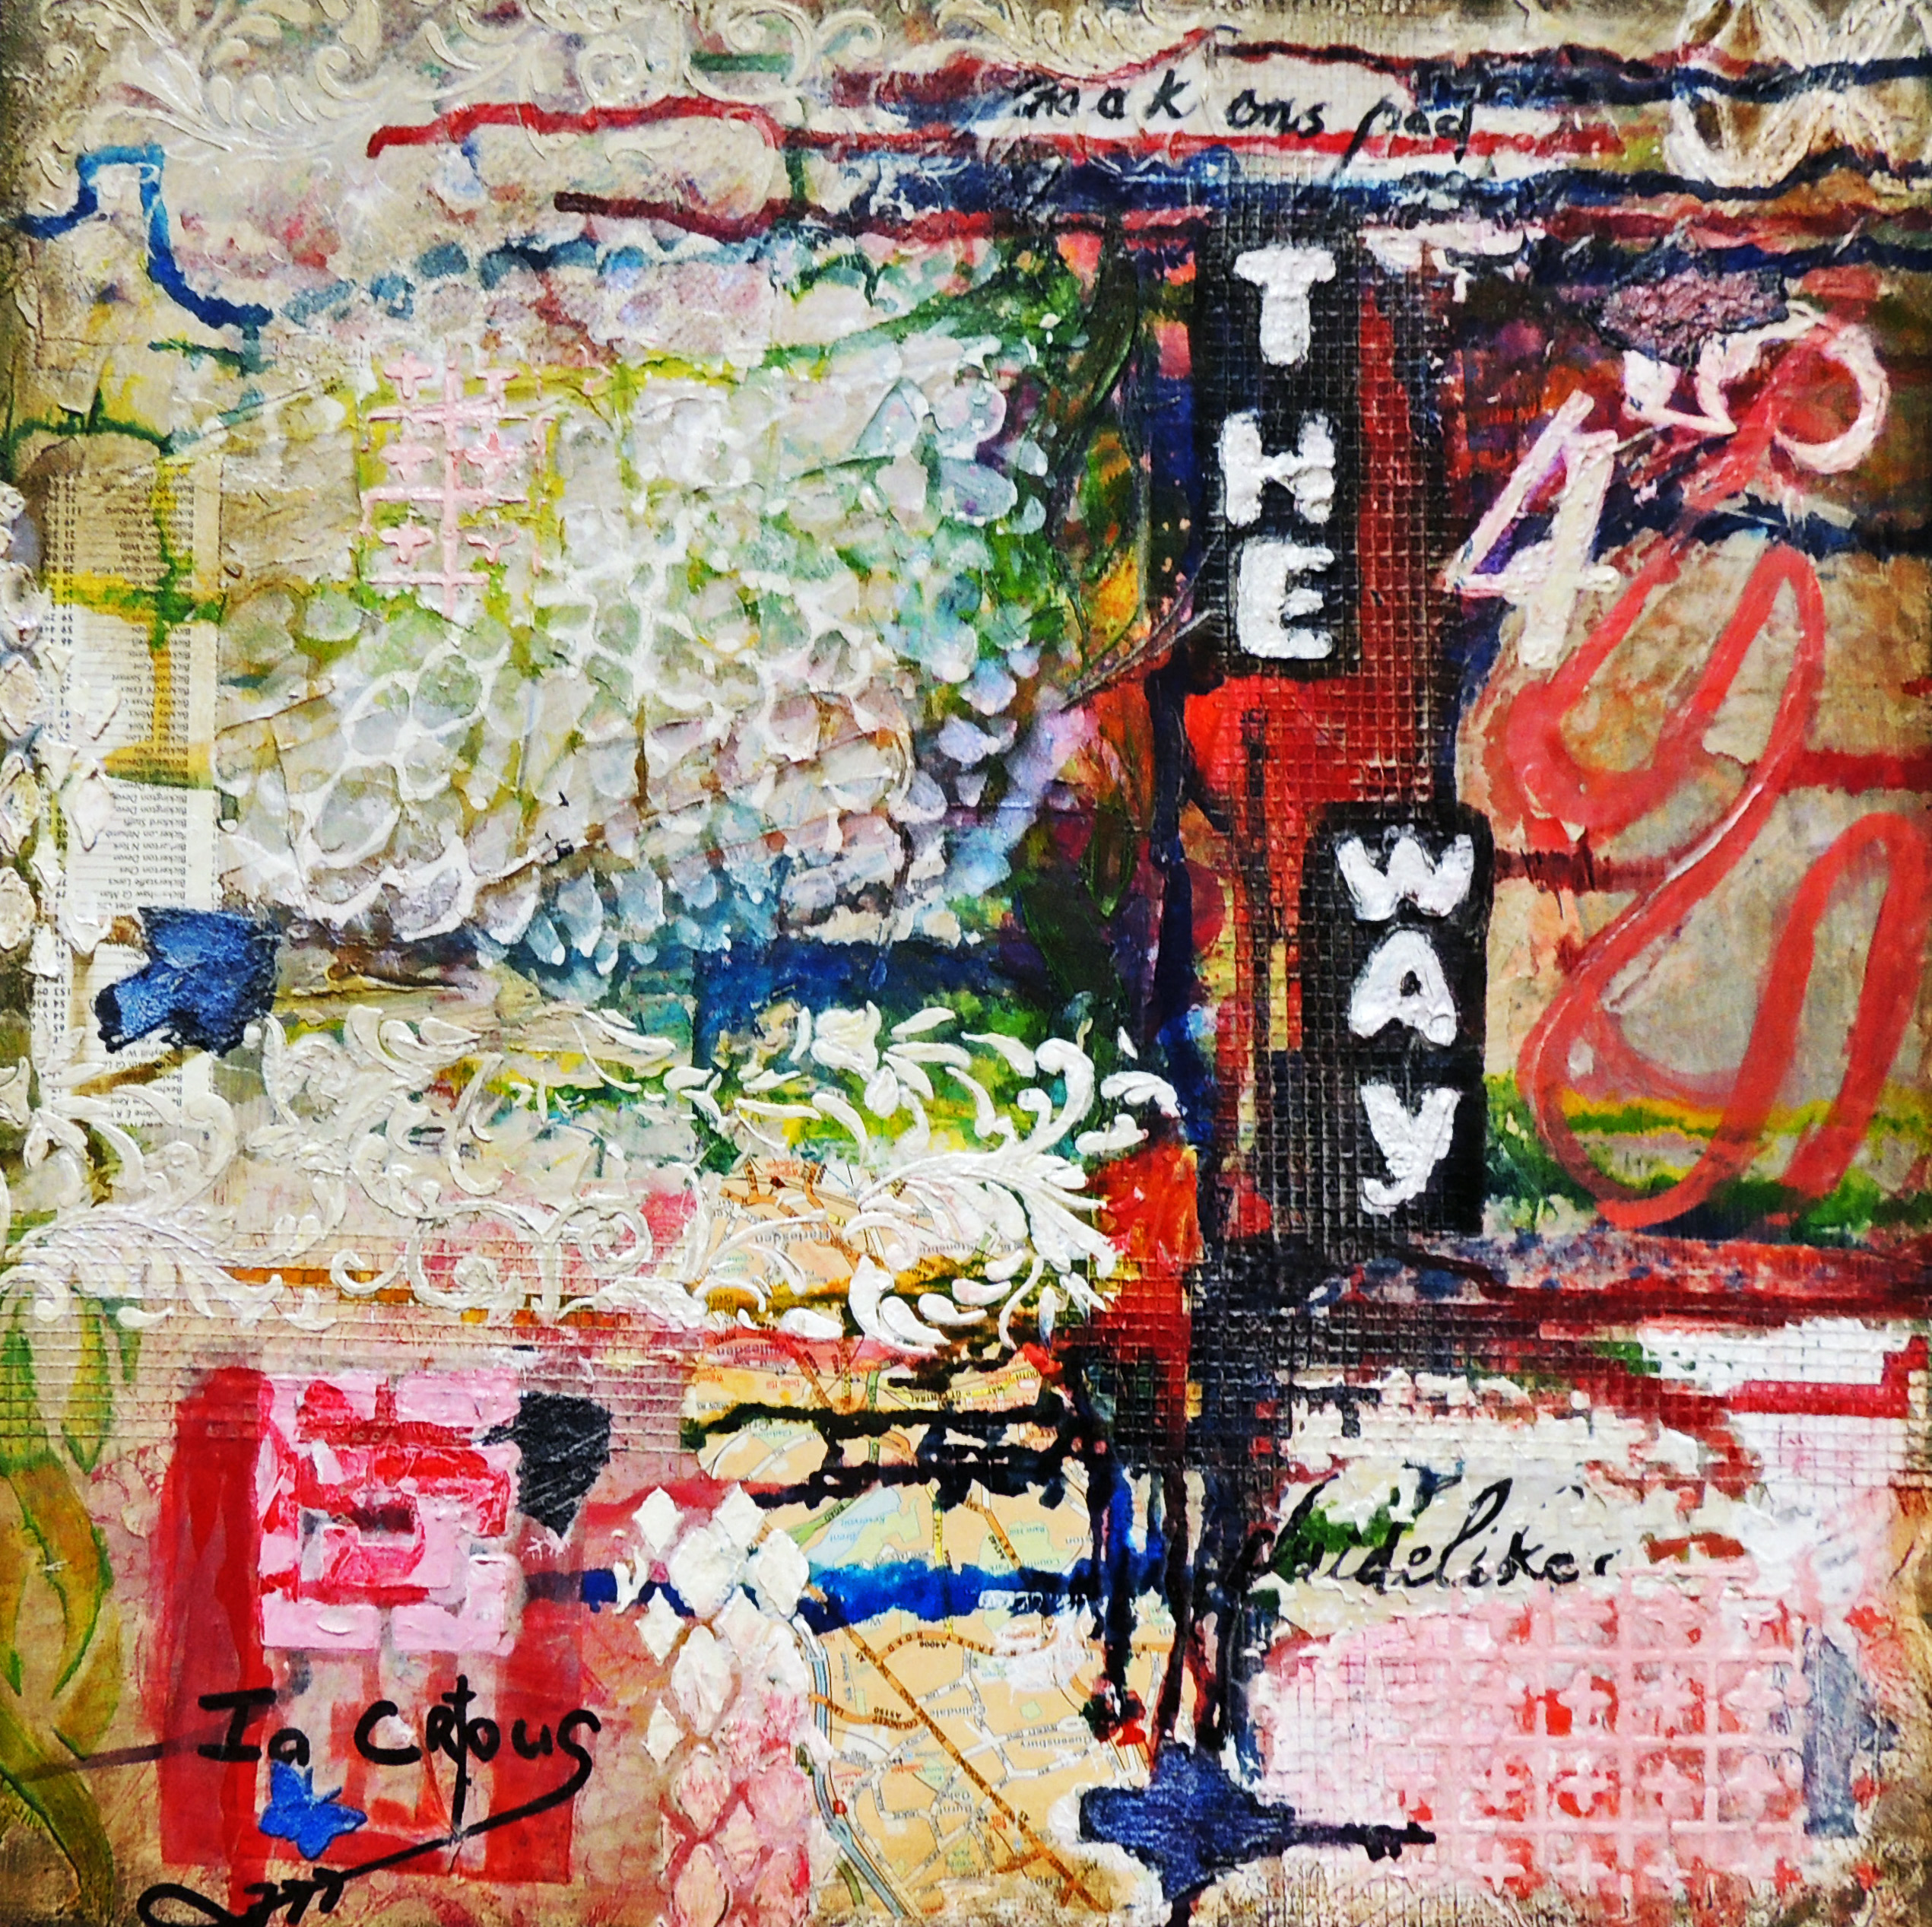 Roadmap- Shop Abstract Art- Collaged old roadmap pieces, gelli prints, drywall tape, textures, on cool and warm red hues.